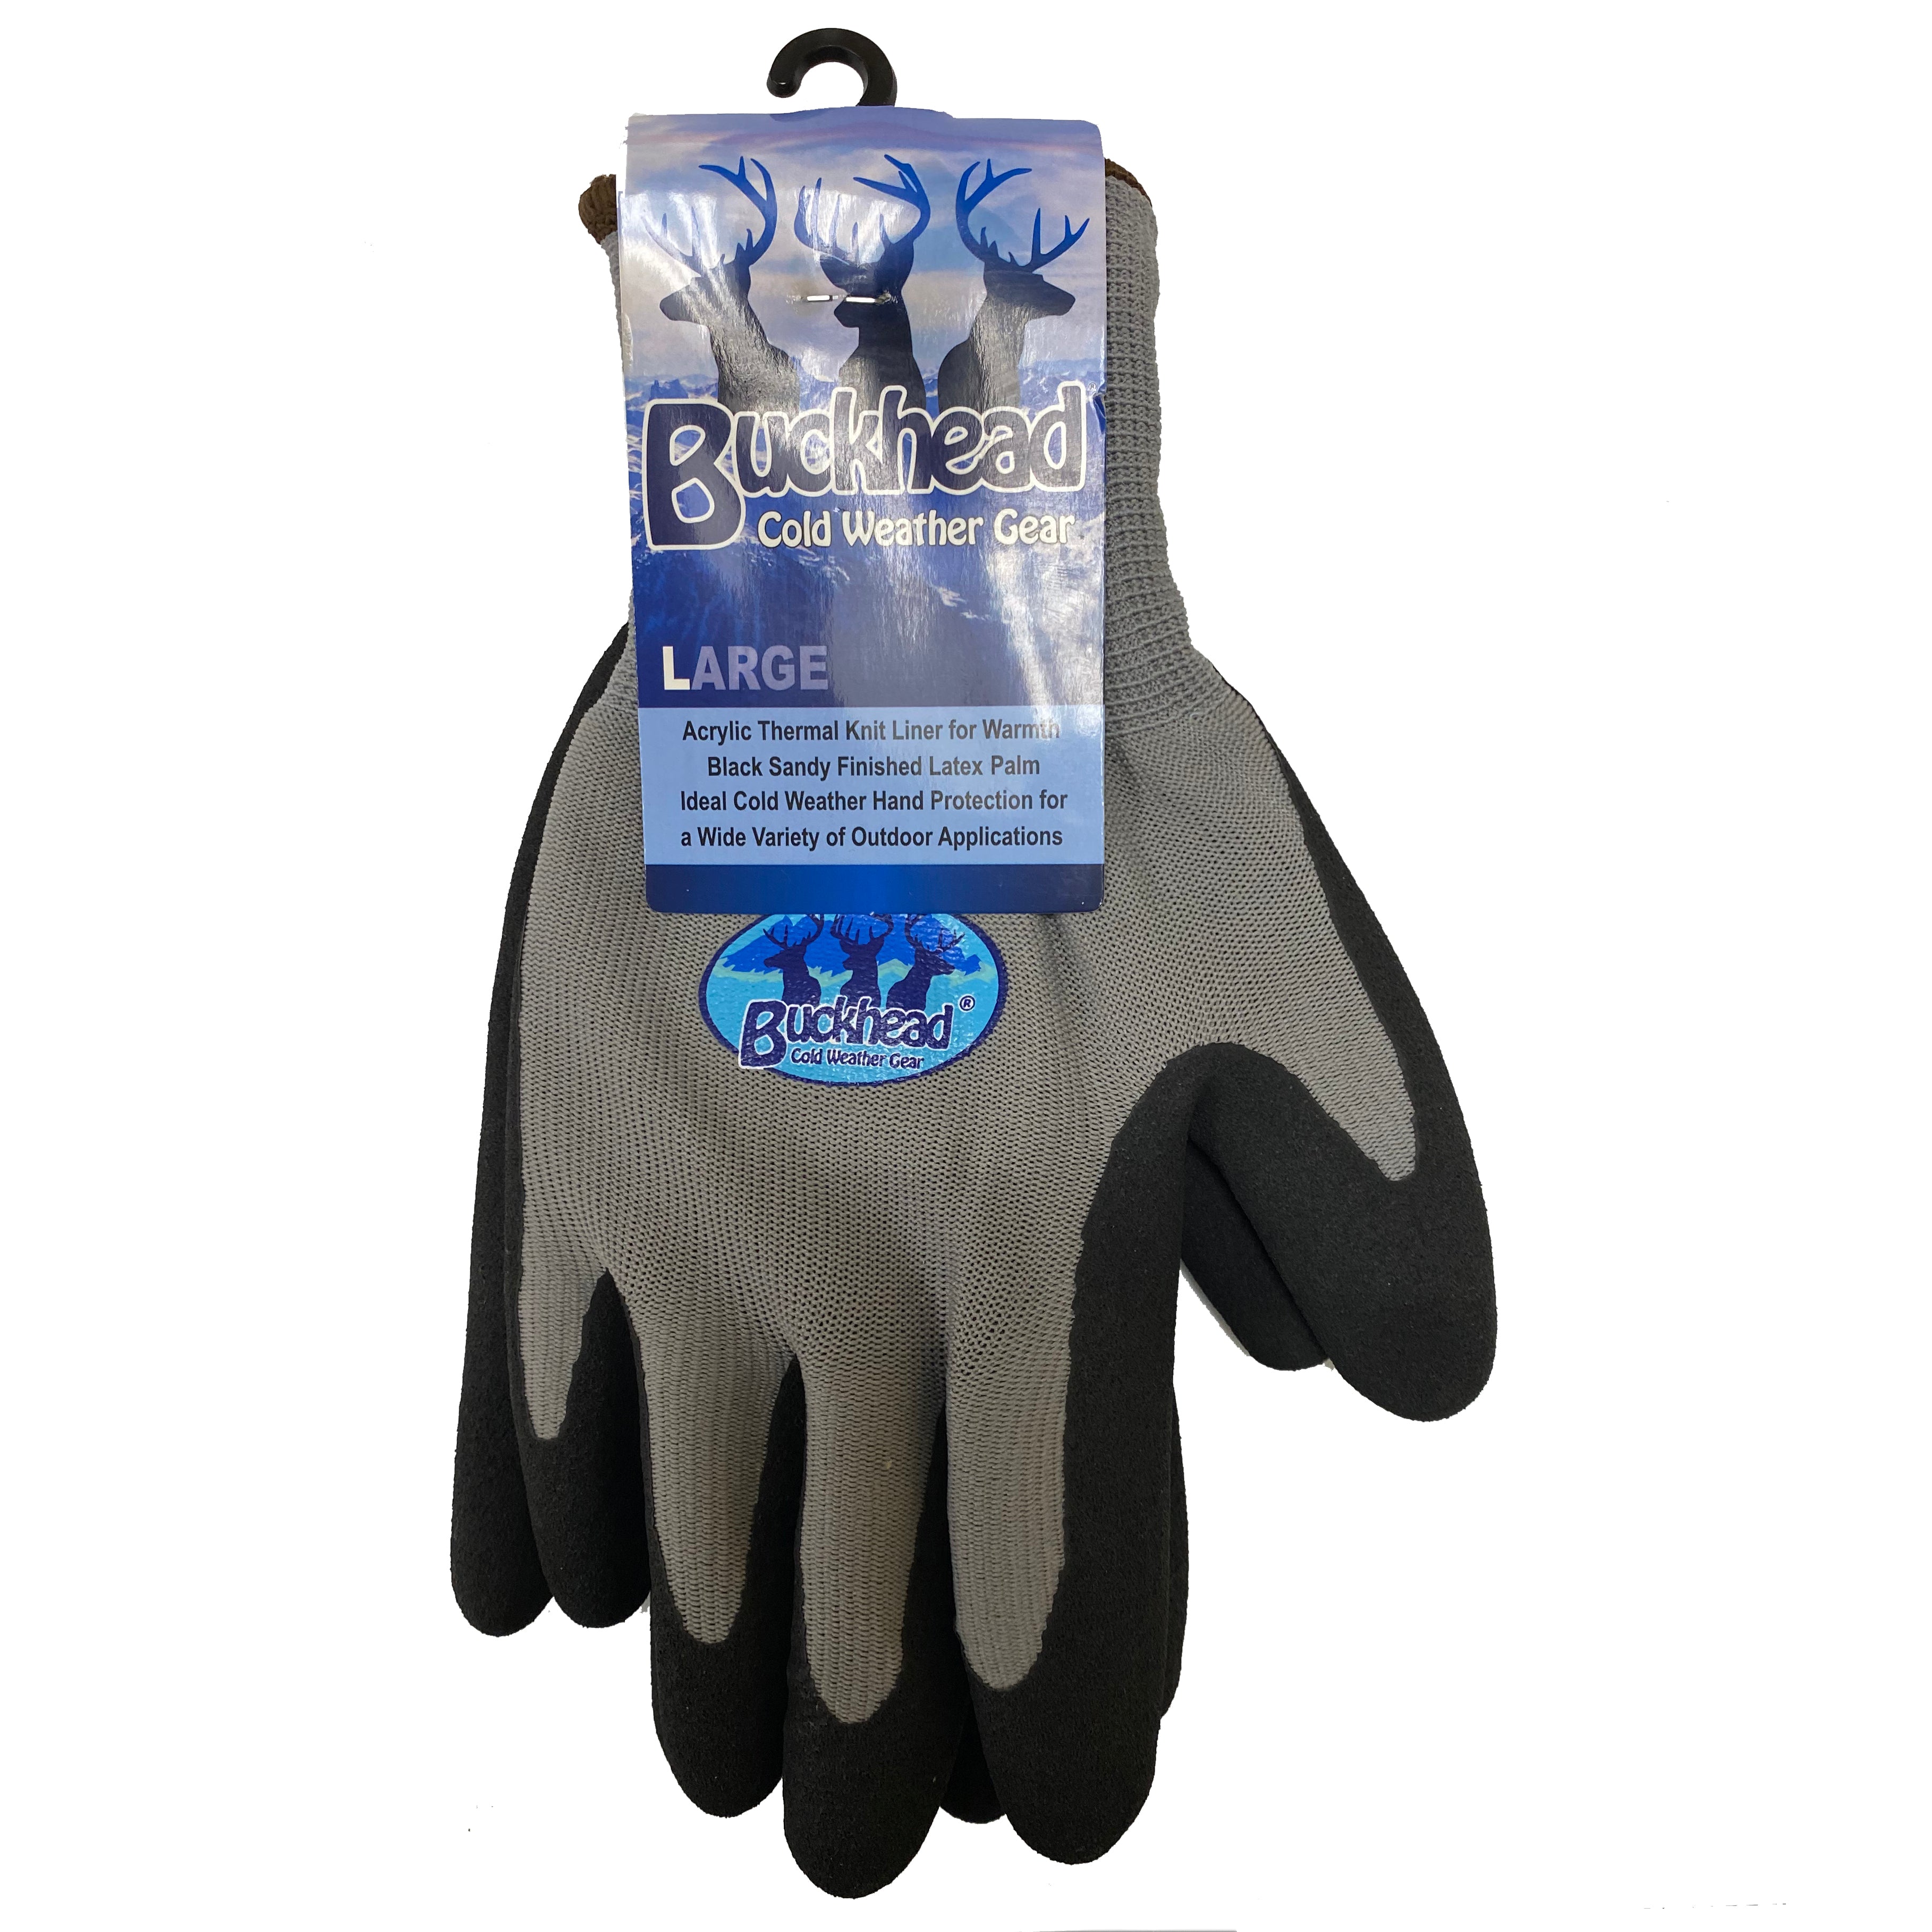 Buckhead Cold Weather Gray Gloves (12CT)